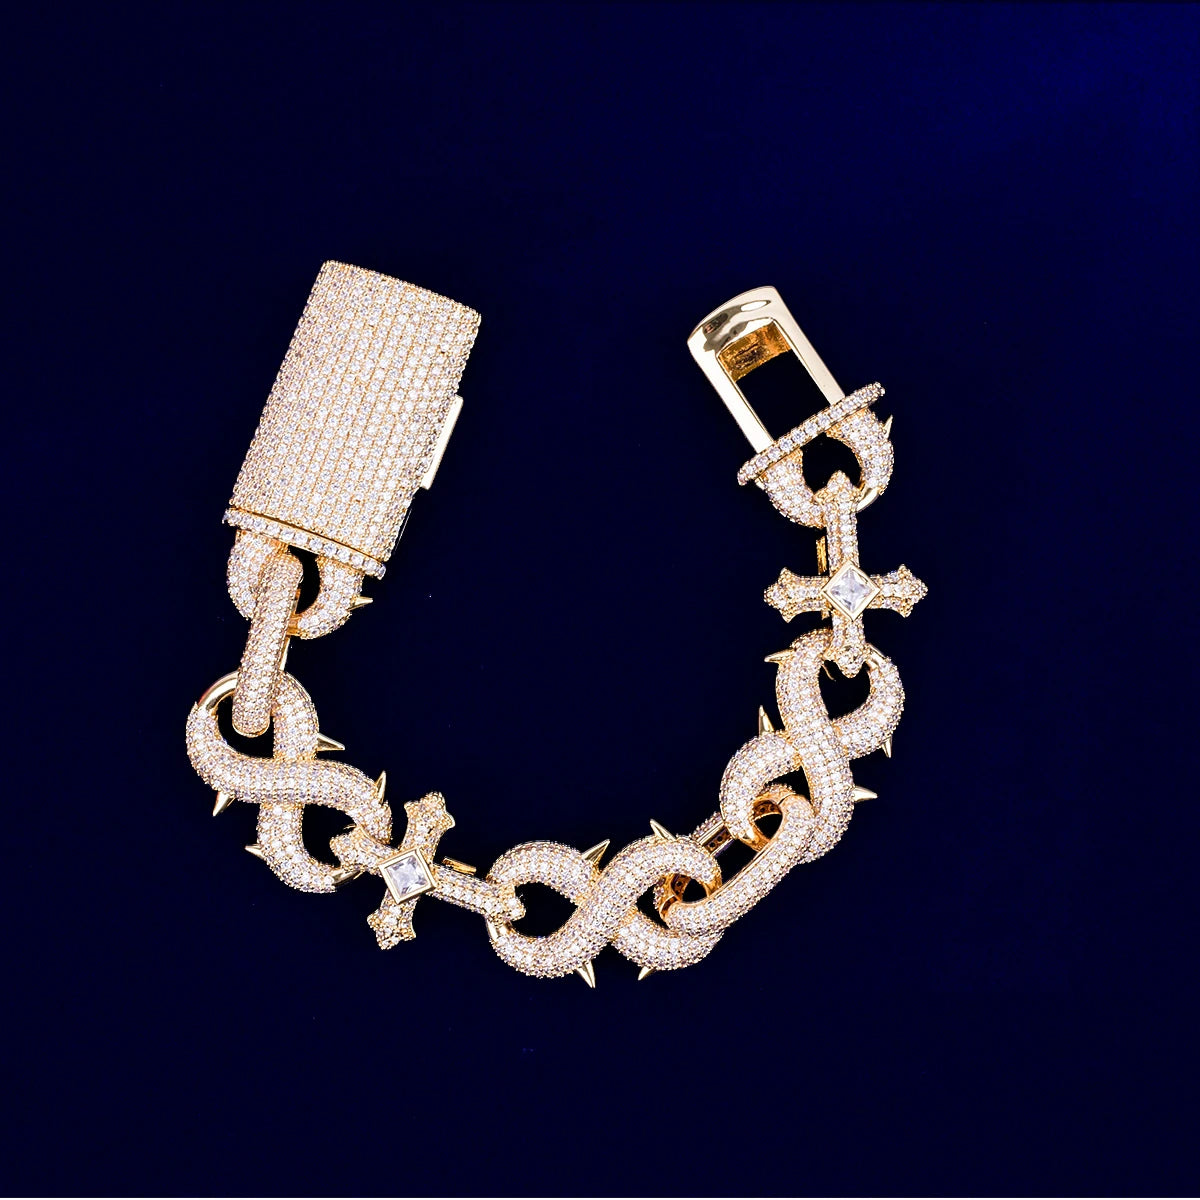 20MM ICED CLAWS INFINITY LINK CHAIN BRACELET